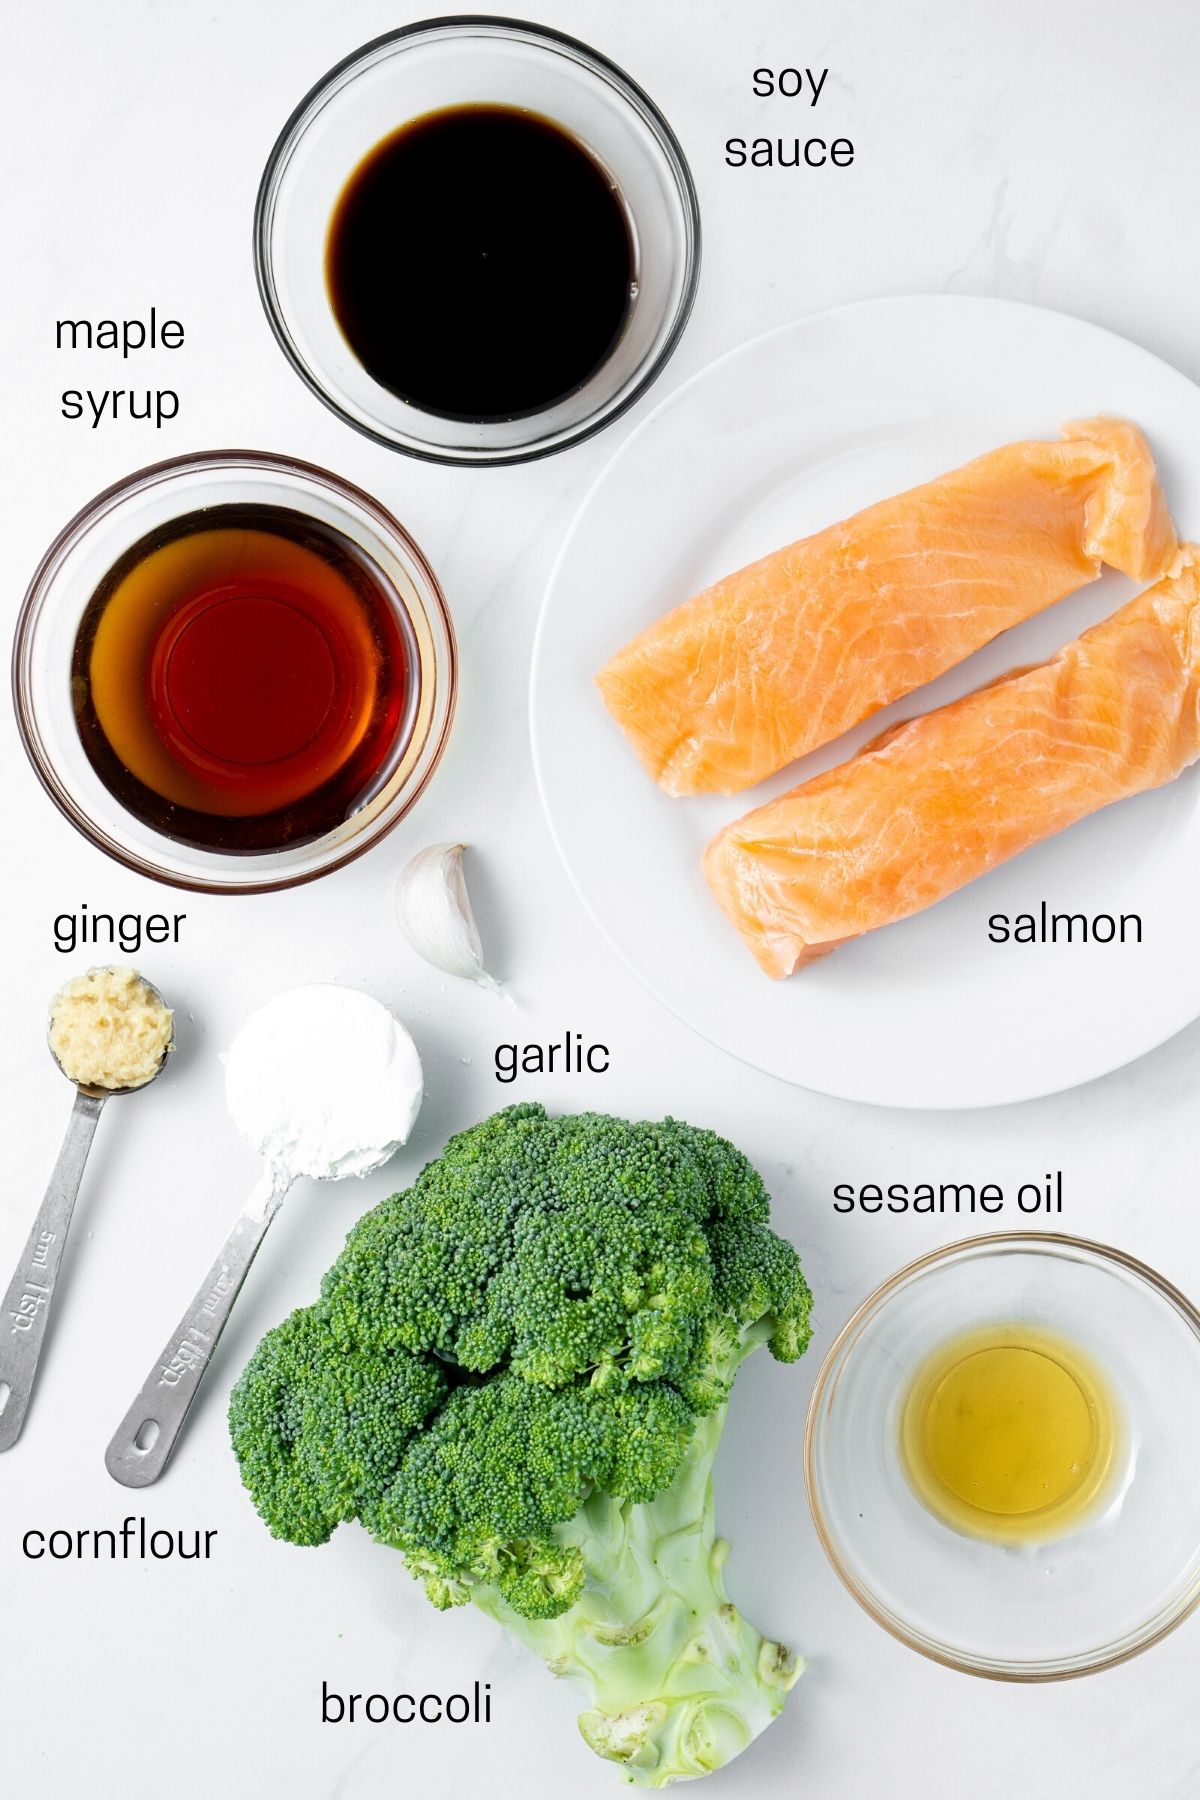 All ingredients needed for sheet pan salmon and broccoli.